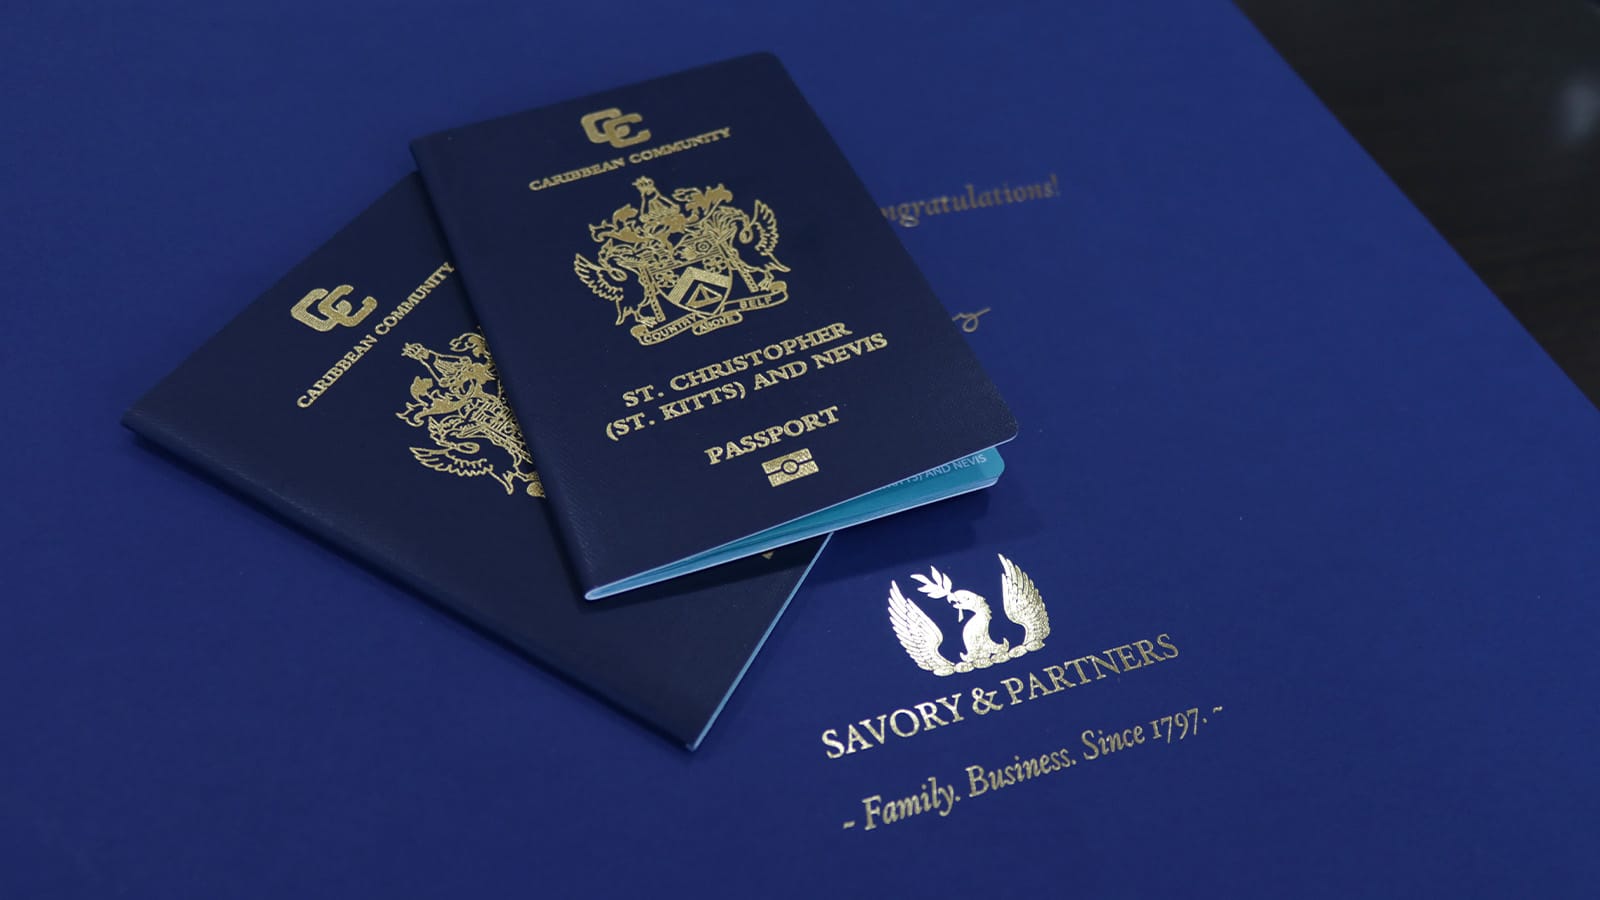 Your Journey Beyond Second Citizenship With Savory & Partners